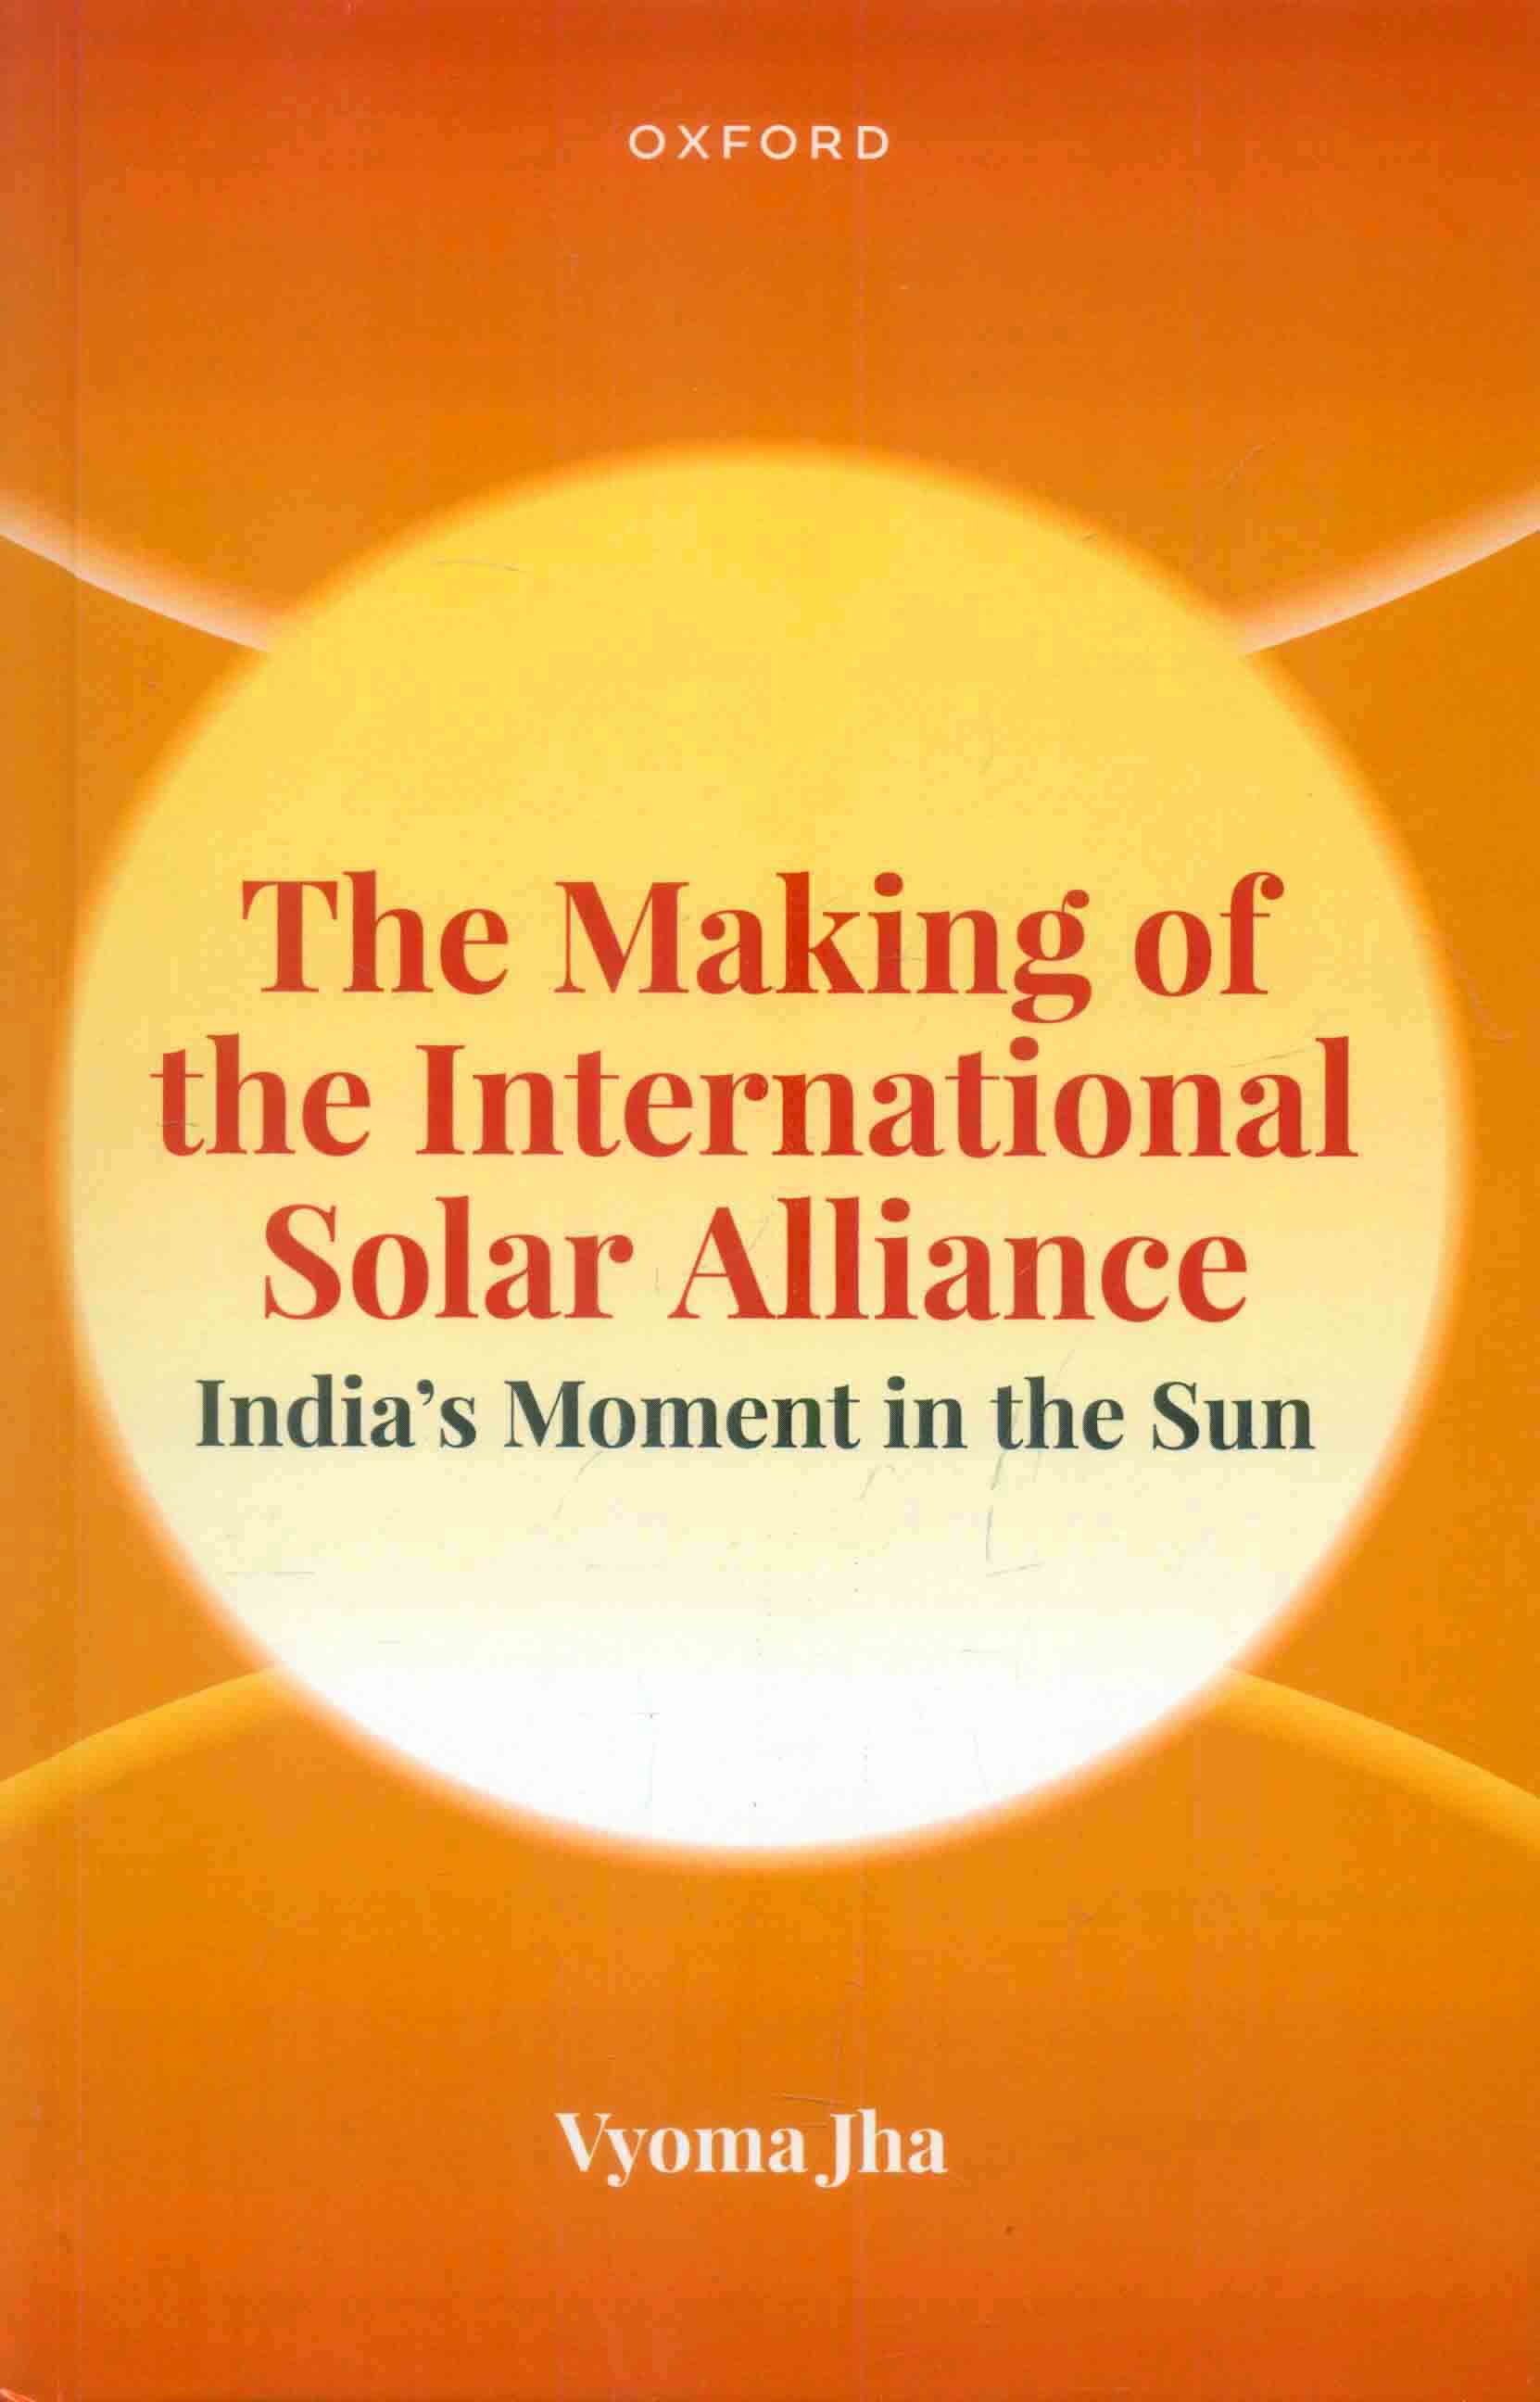 The making of the international solar alliance: India